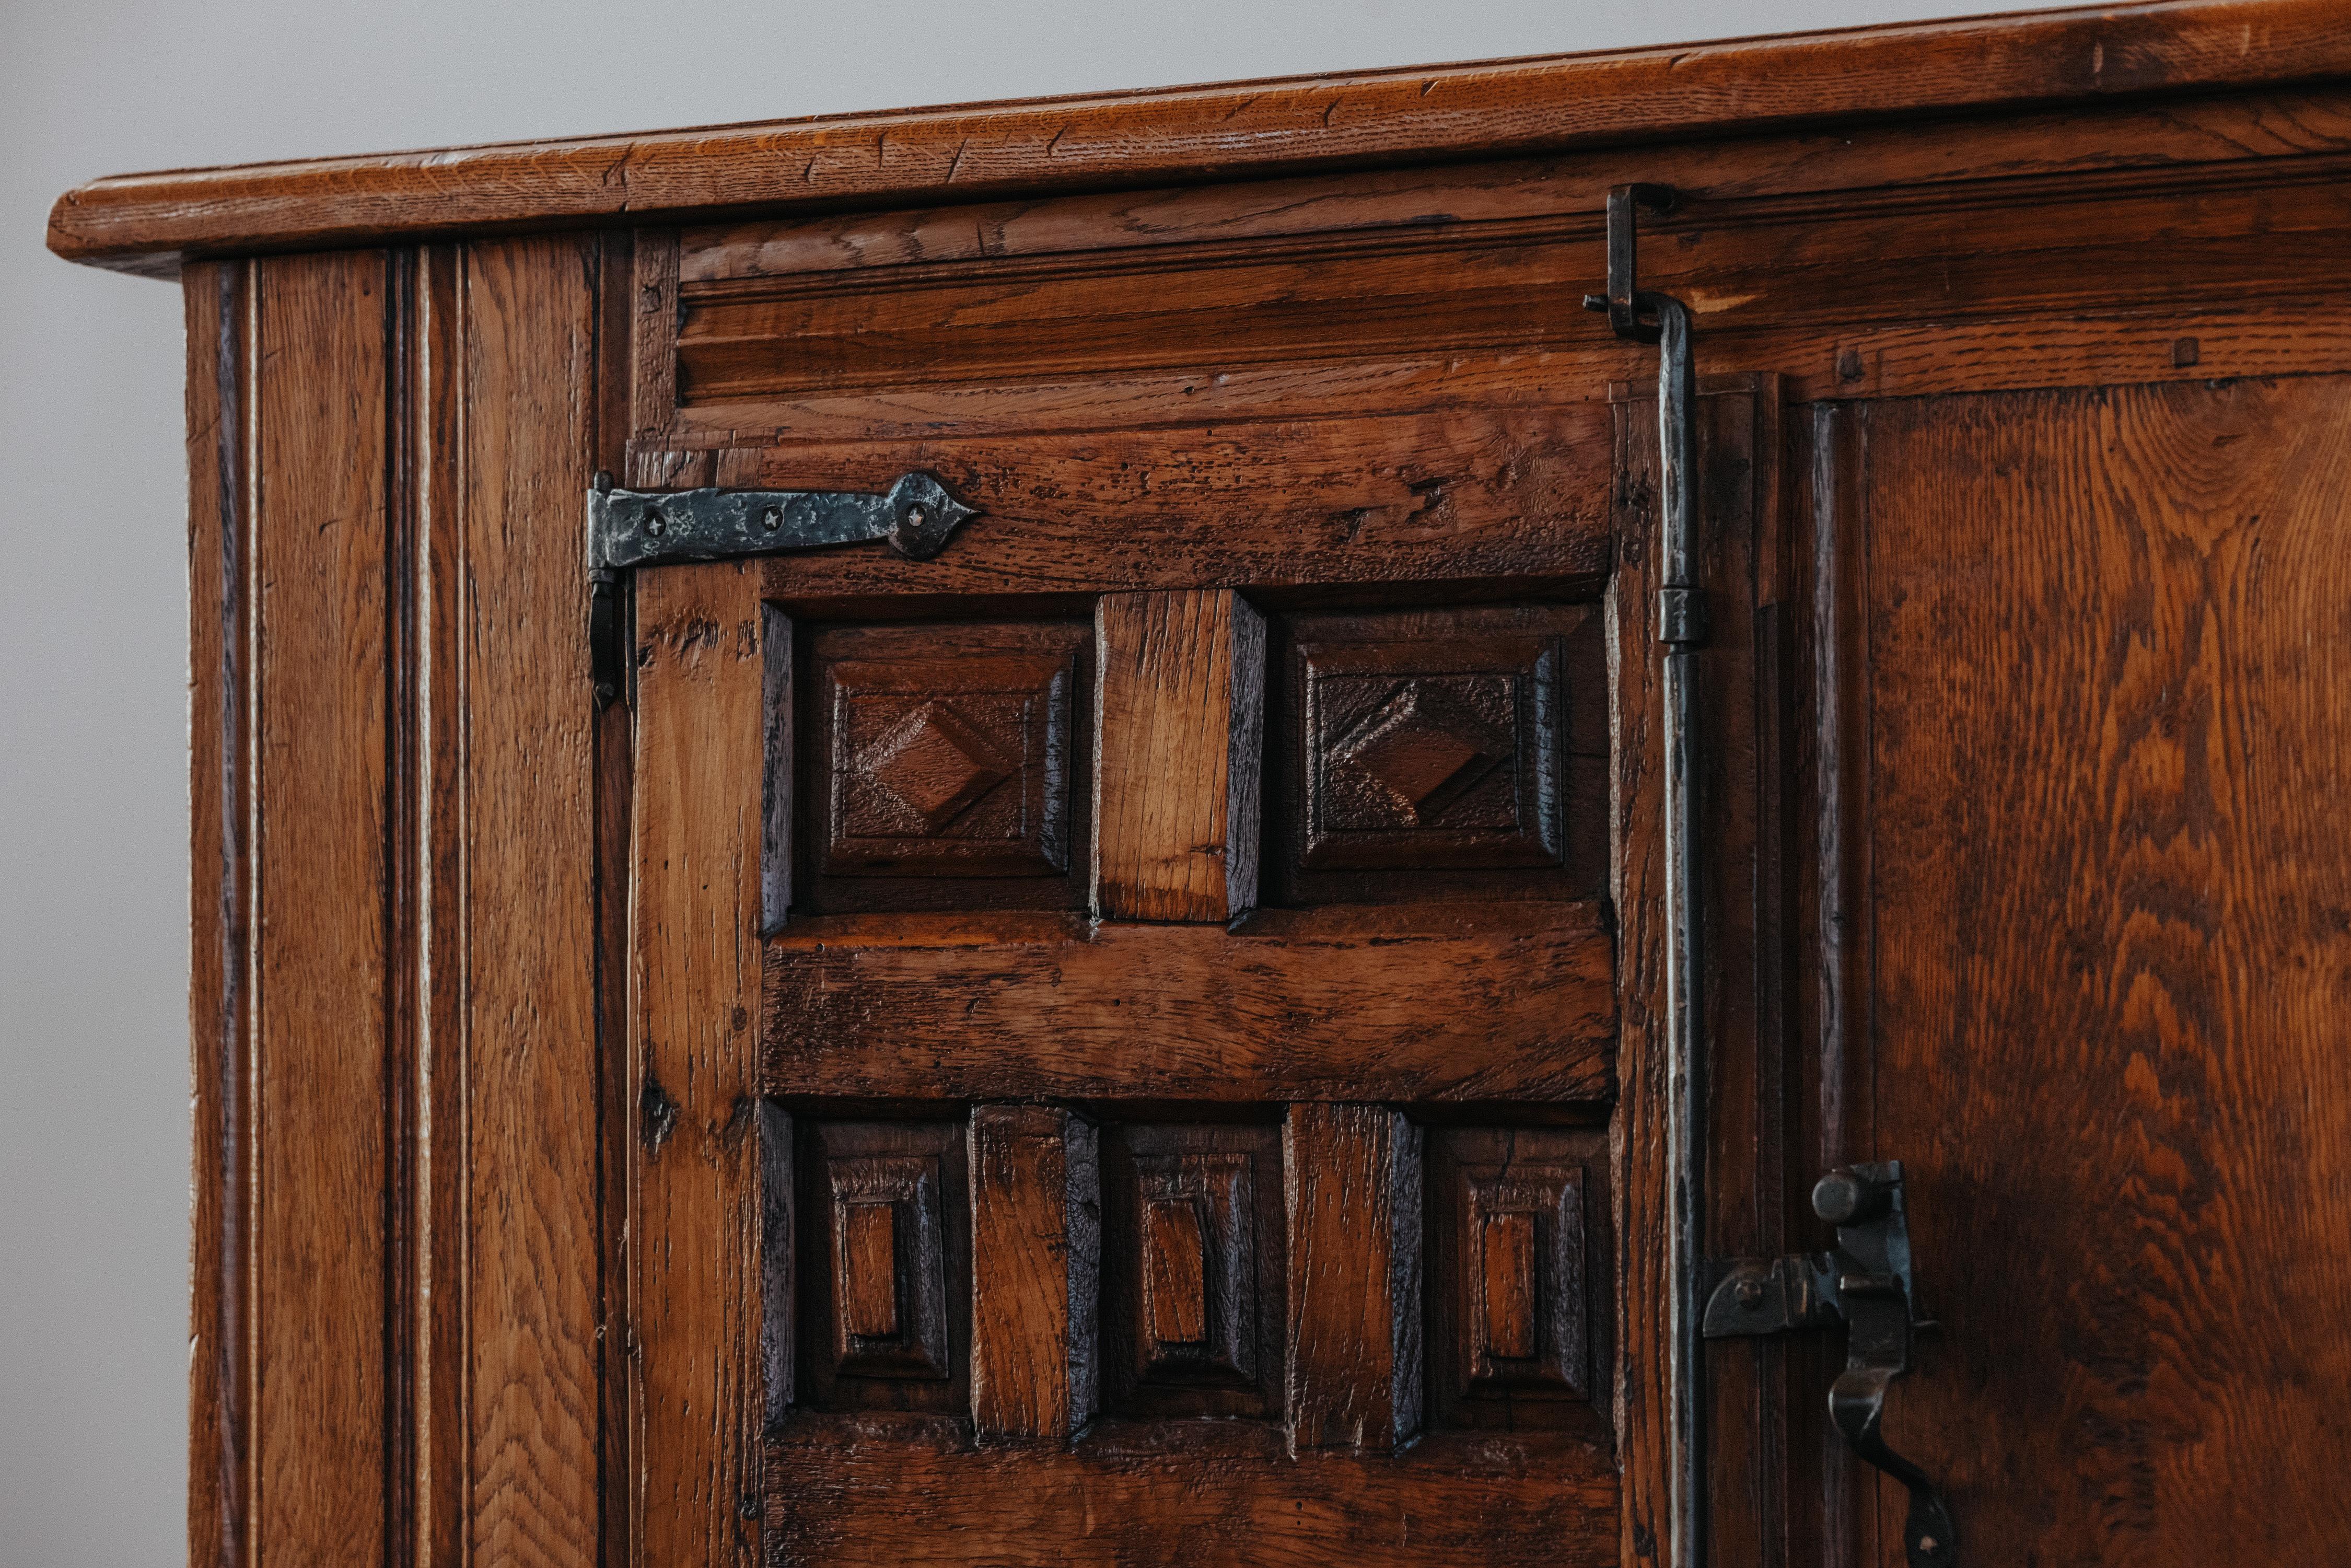 Early Oak Two Door Cabinet From Spain, Circa 1780.  Solid oak construction with original iron hardware and detail.  Superb patina and use.  Rare model.